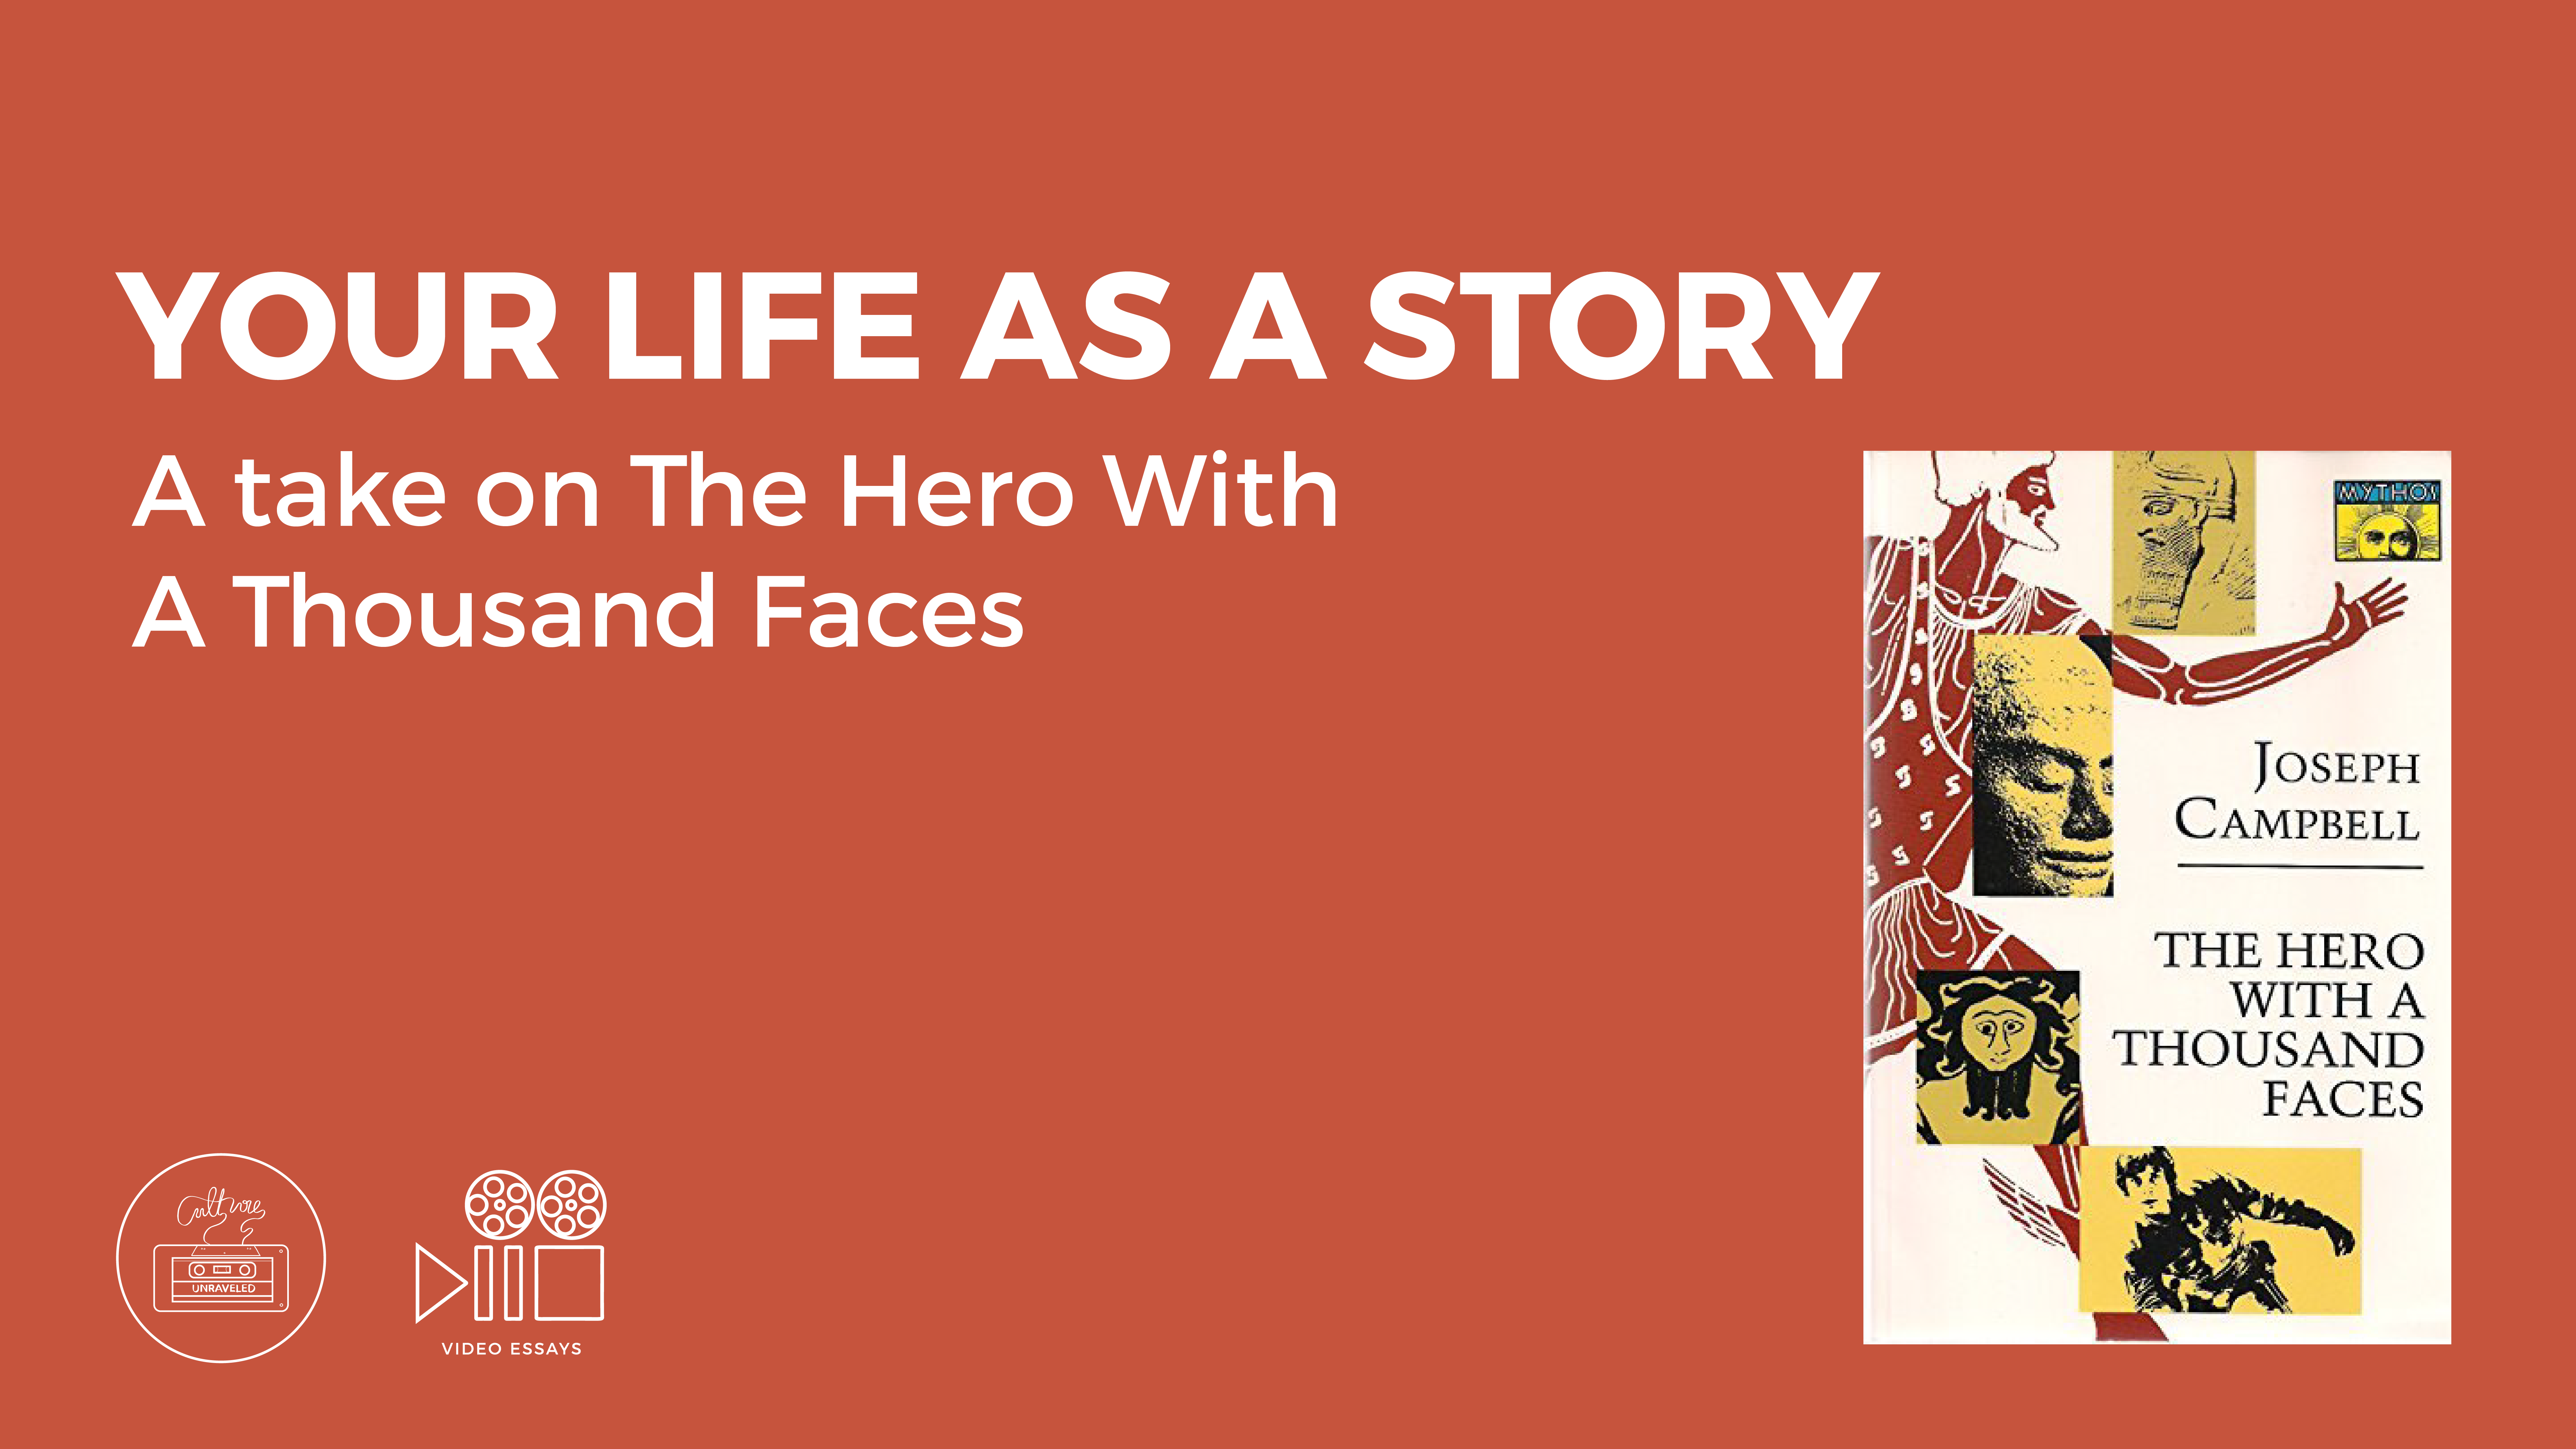 Your Life As A Story. A take on The Hero with a Thousand Faces